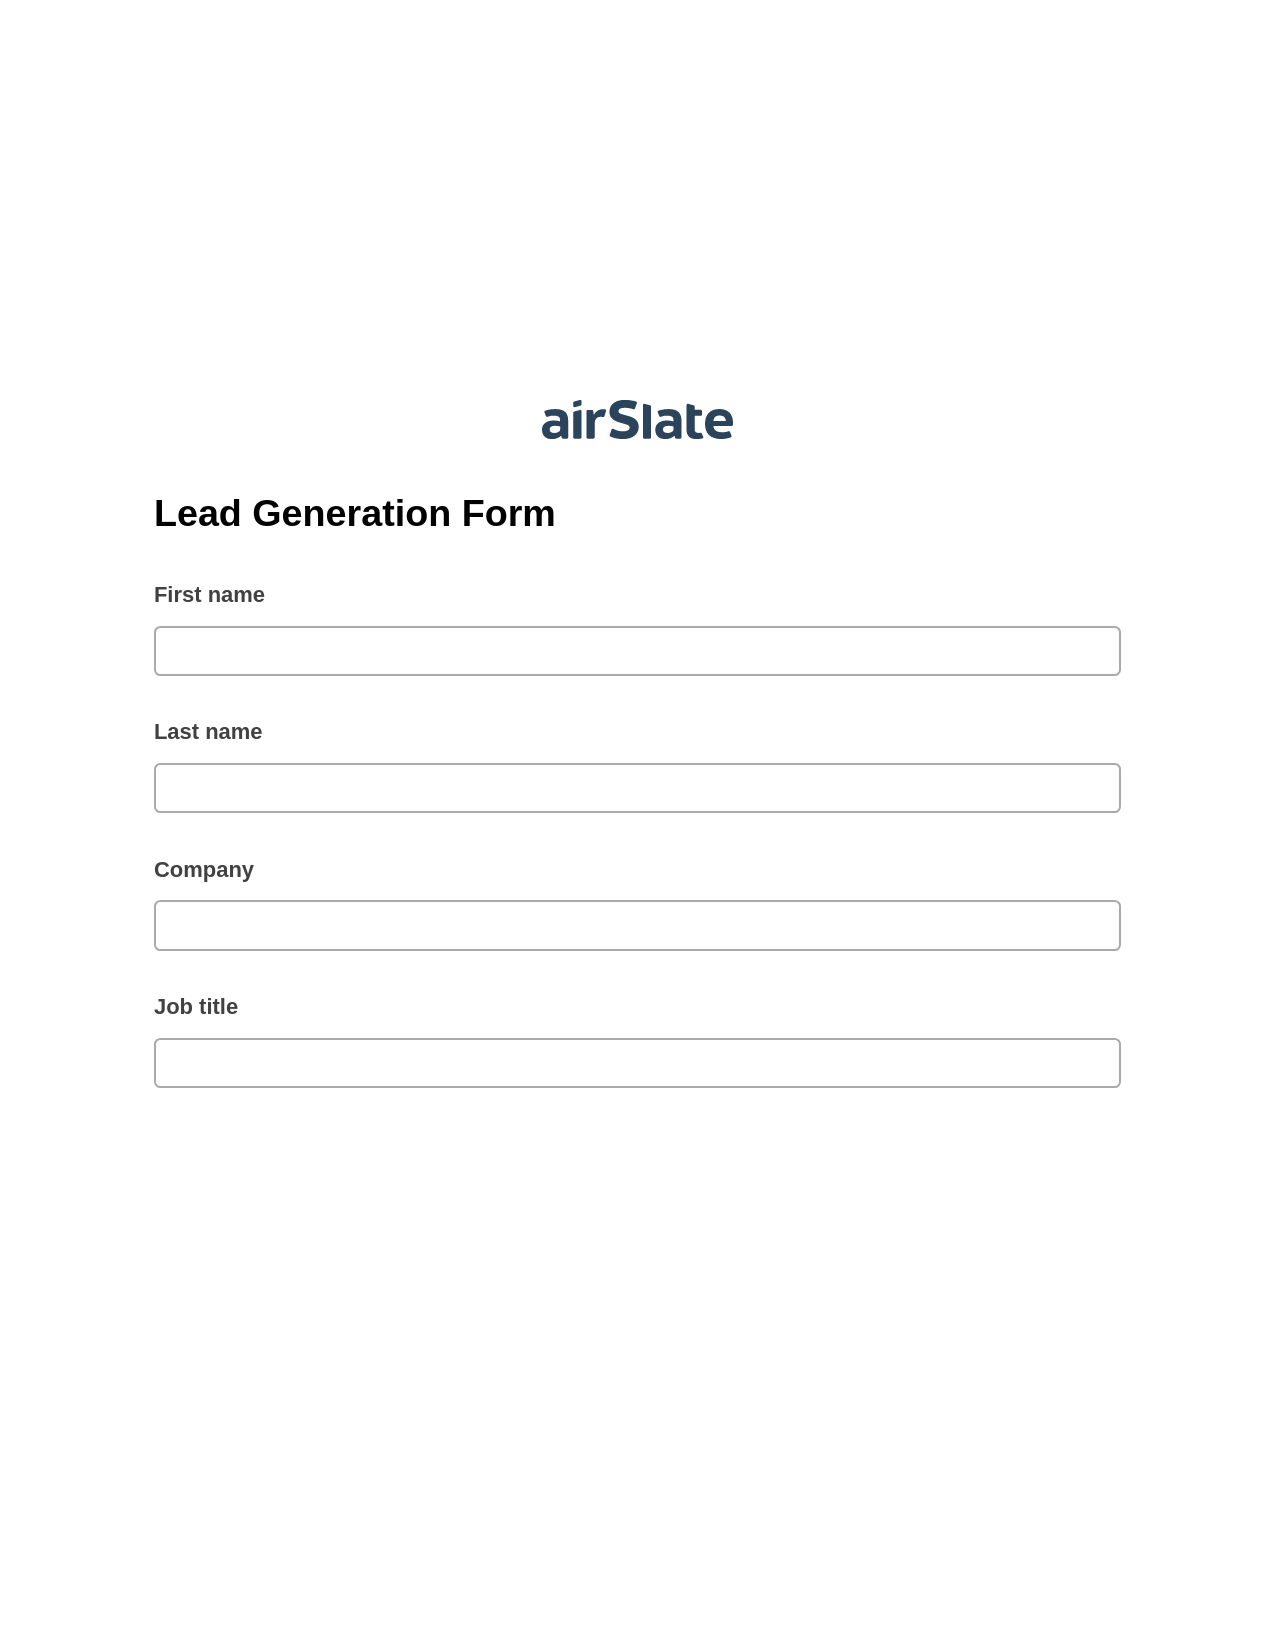 Lead Generation Form Pre-fill Dropdowns from Google Sheet Bot, Remove Tags From Slate Bot, Post-finish Document Bot